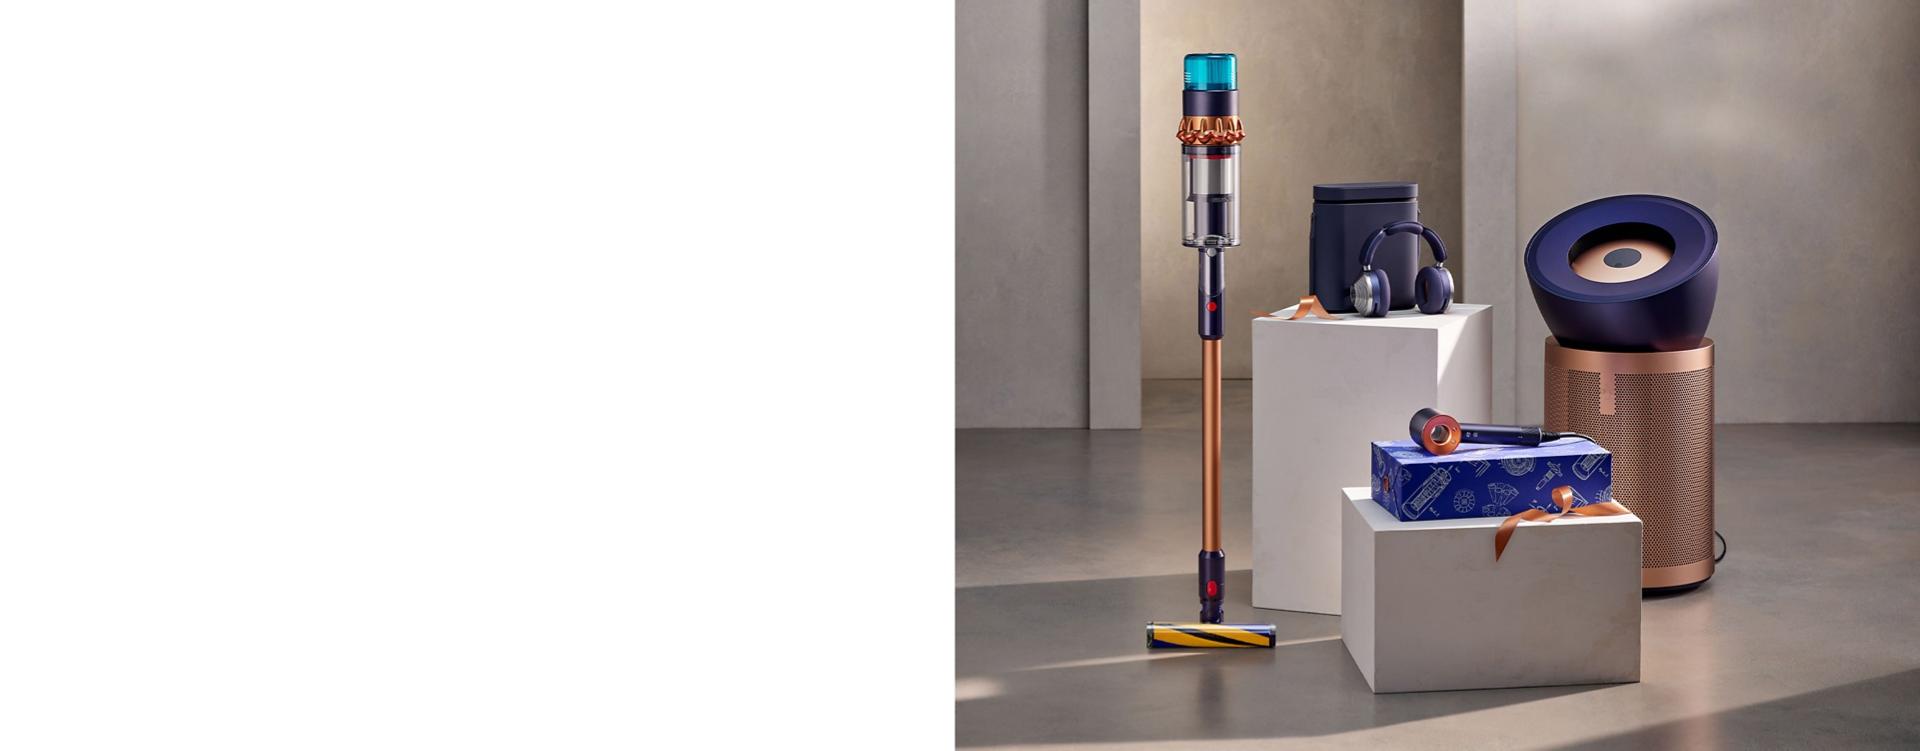 Dyson technology displayed in exclusive colours